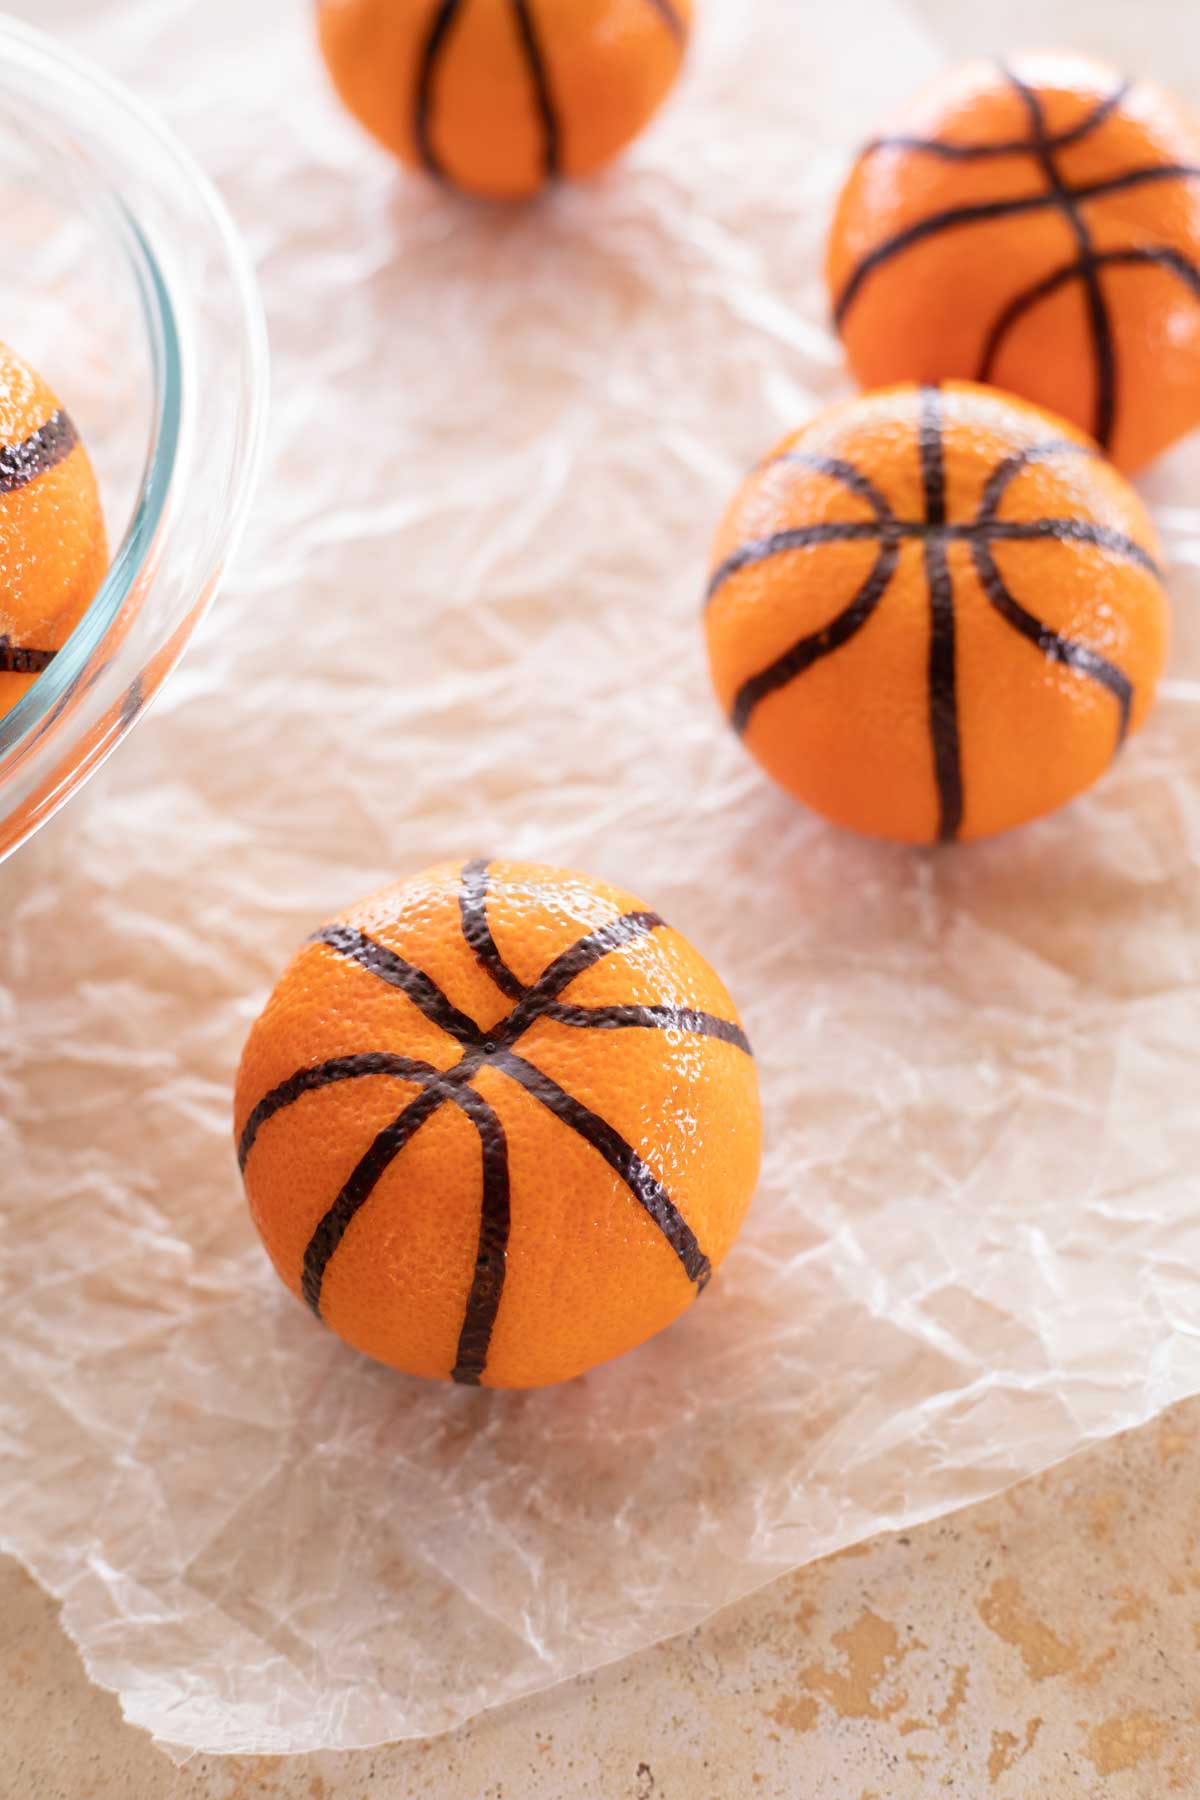 Closeup of a clementine that's been made into a basketball with others in background.